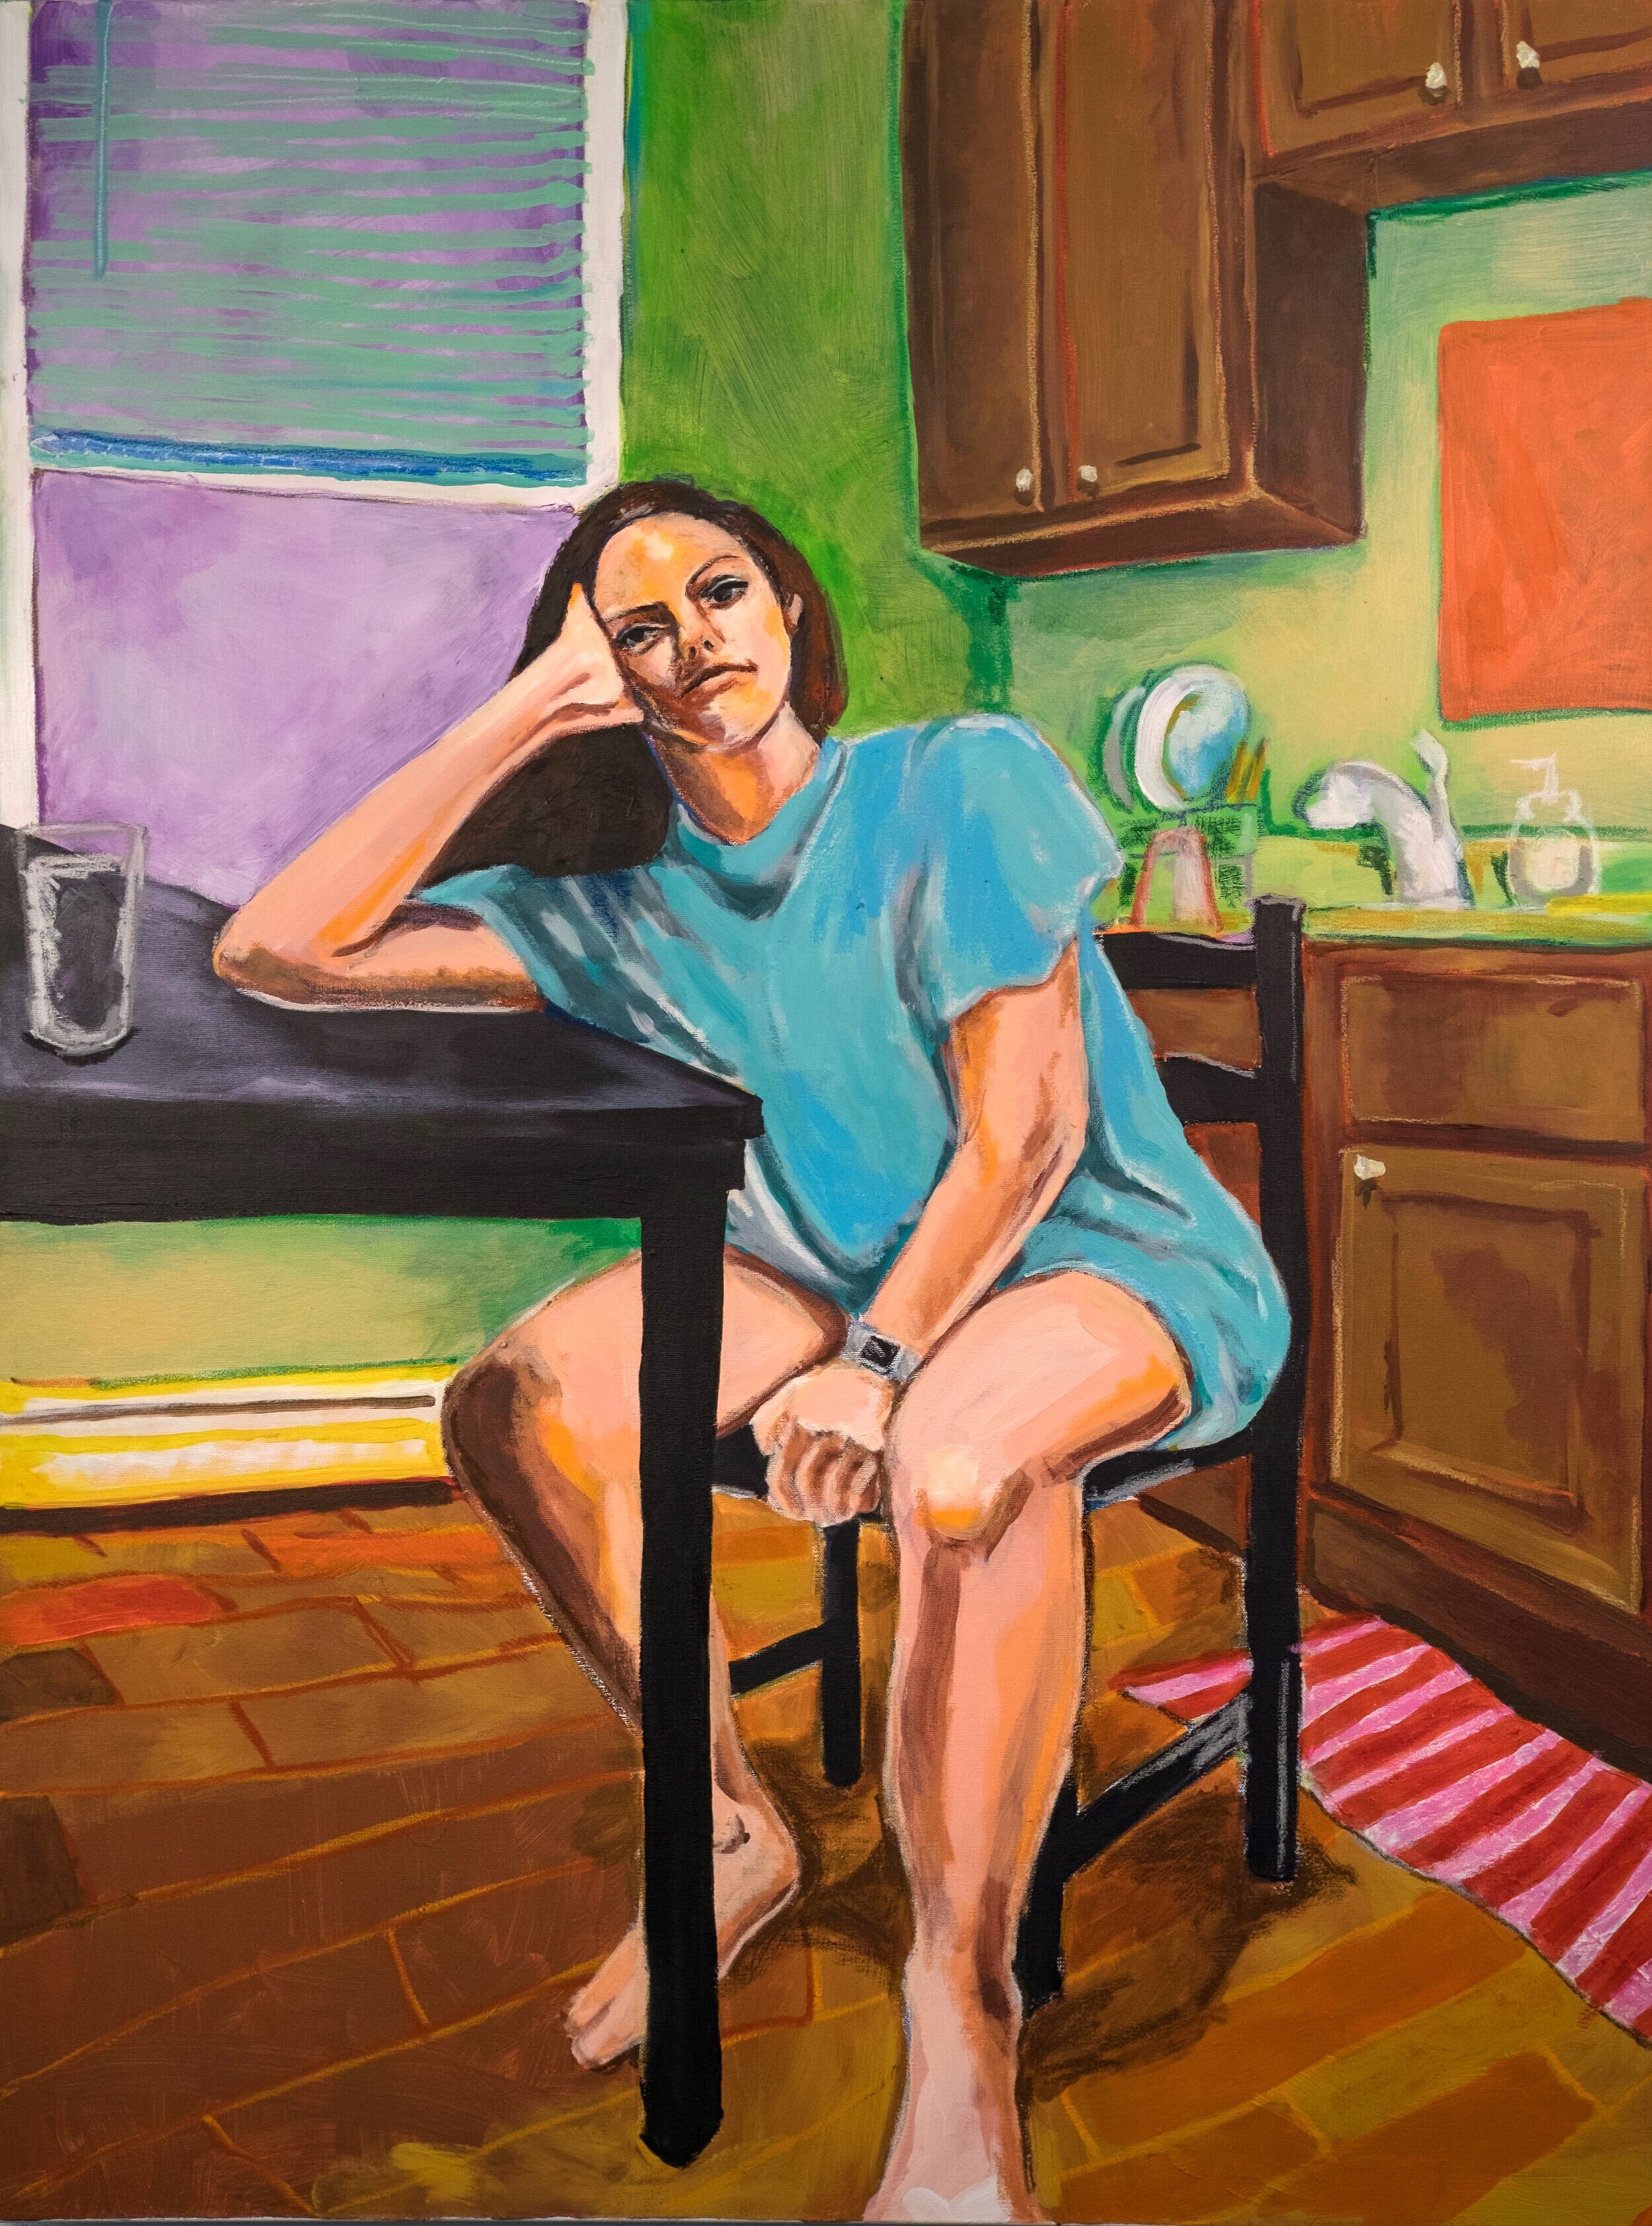   Caroline in Our Kitchen   Acrylic Paint and Oil Pastel on Canvas  2018  32 inches x 40 inches 